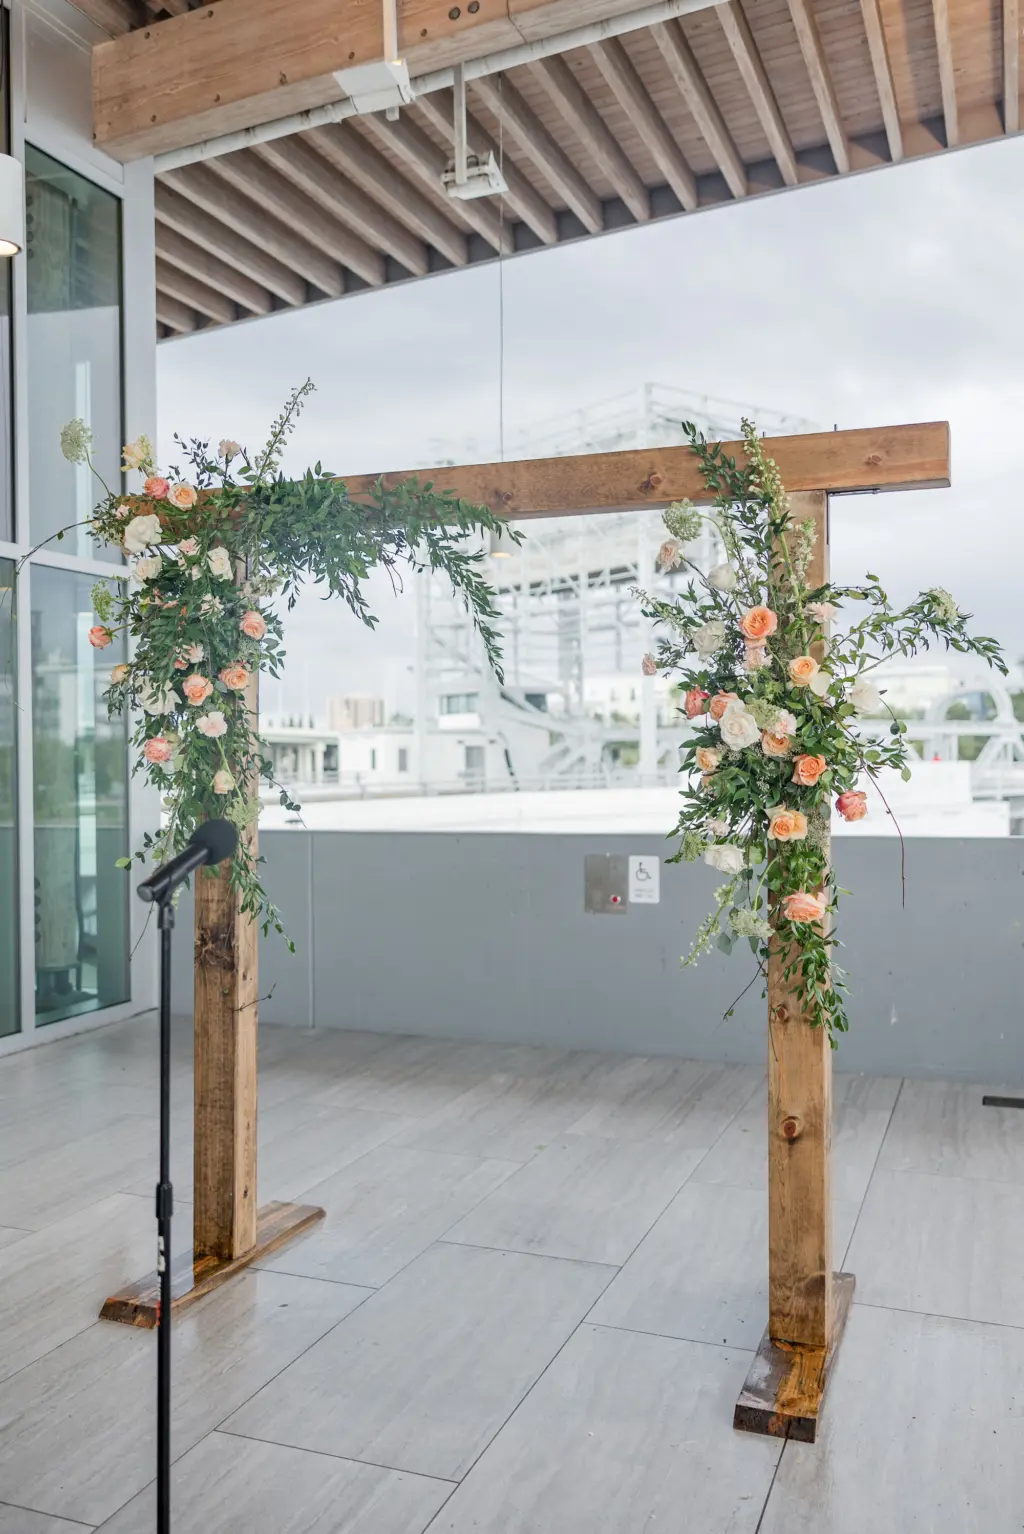 Rustic Wooden Arch with Pink, Orange, and White Roses and Greenery for Downtown Tampa Outdoor Rooftop Garden Wedding Ceremony Decor Ideas